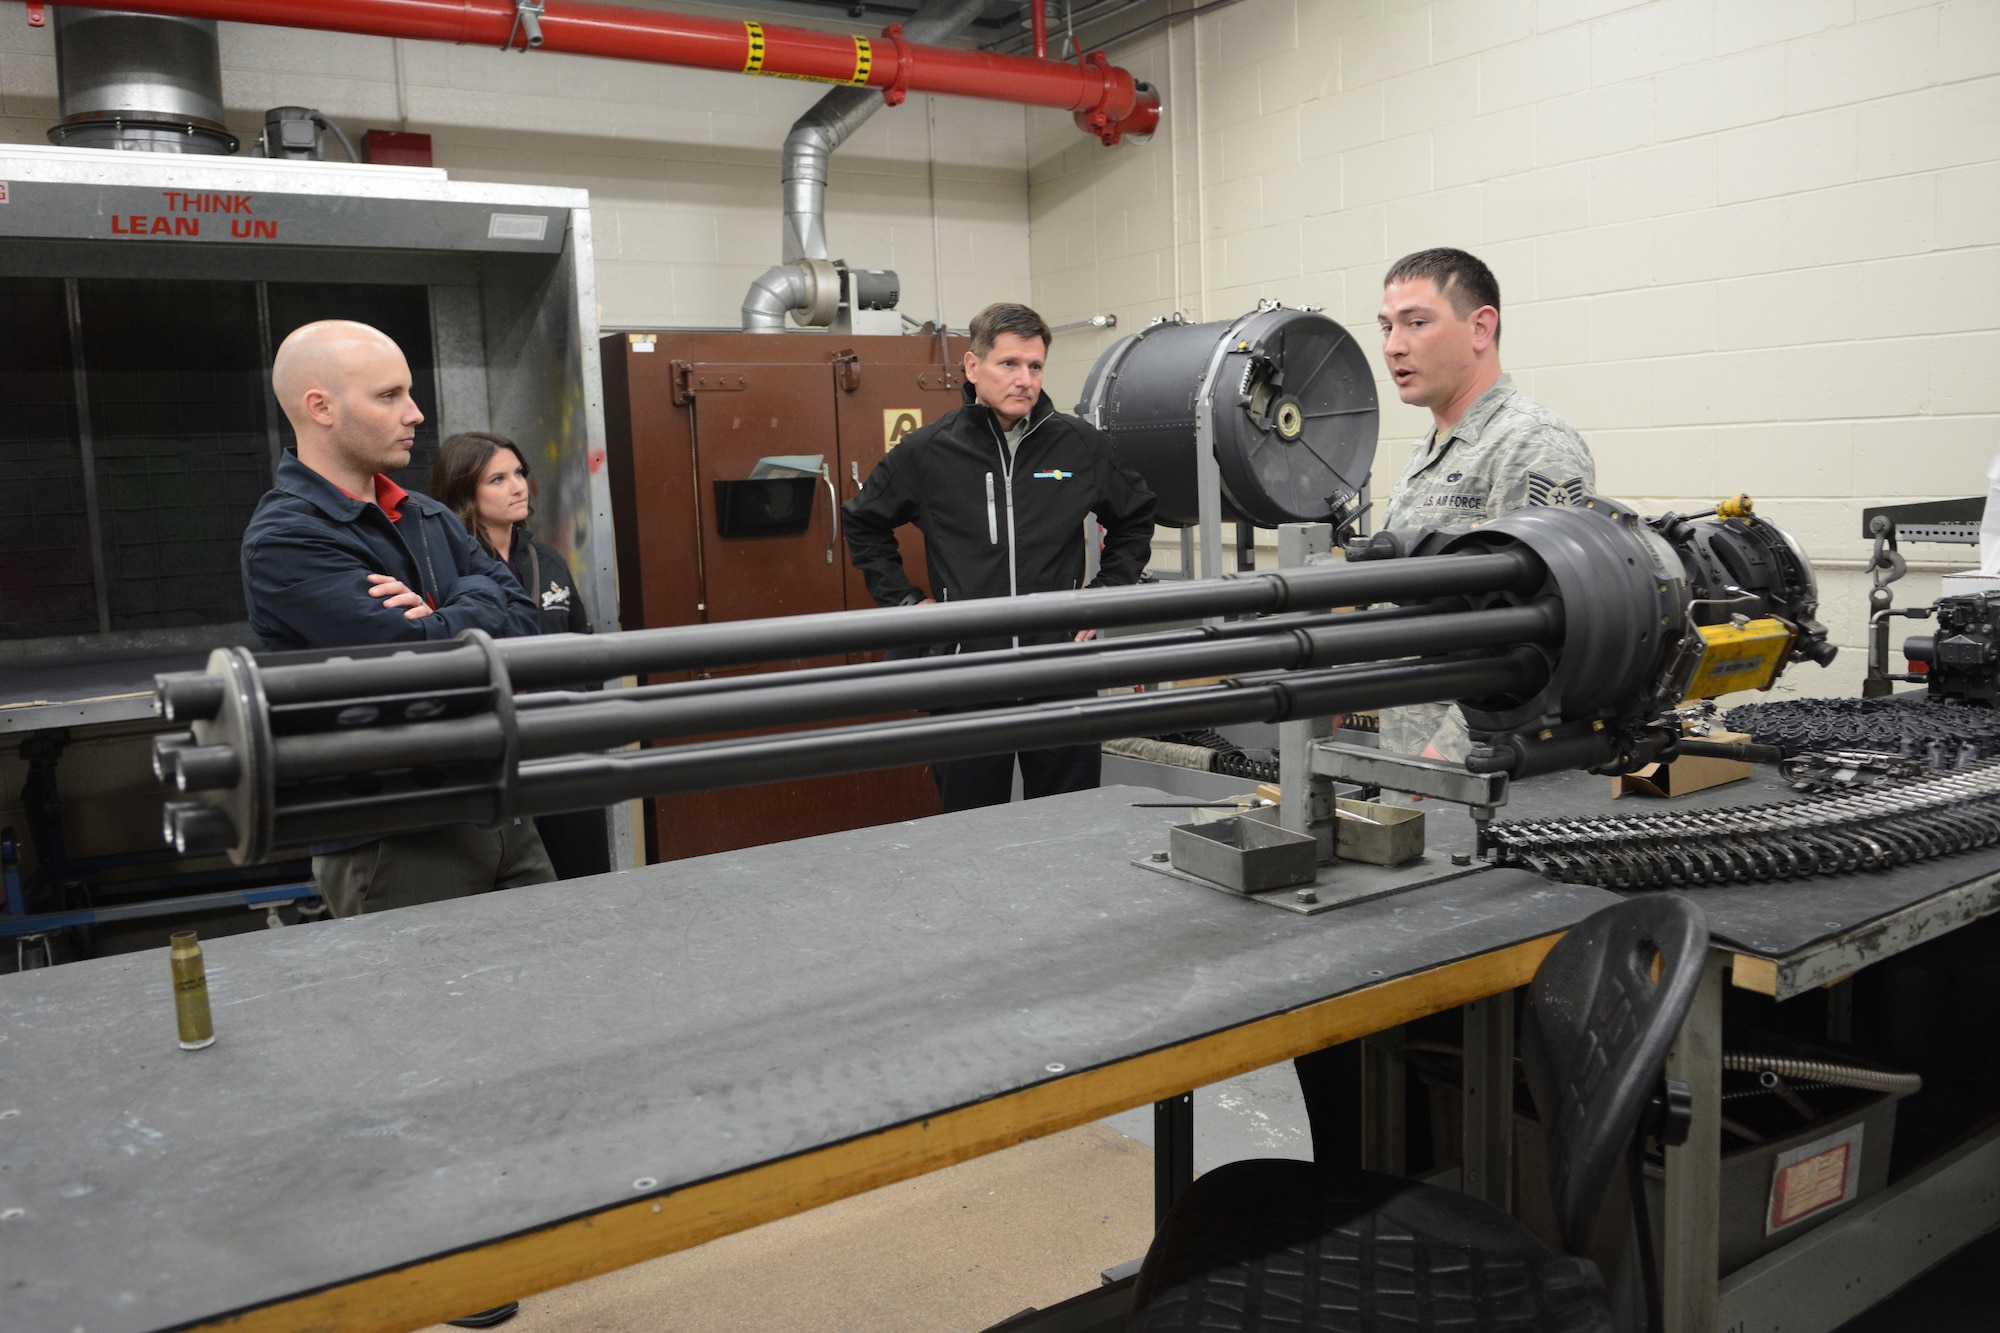 Tech. Sgt. Andrew D. Brickl, 115th gunshop supervisor, teaches the Leinenkugel family about the F-16 Fighting Falcon gun systems during a base visit to the 115 FW, Madison, Wis., May 3, 2014. The Leinenkugel family visited the base to share insight on how their military background helped them become a successful Wisconsin-based company. (Air National Guard photo by Senior Airman Andrea F. Liechti)